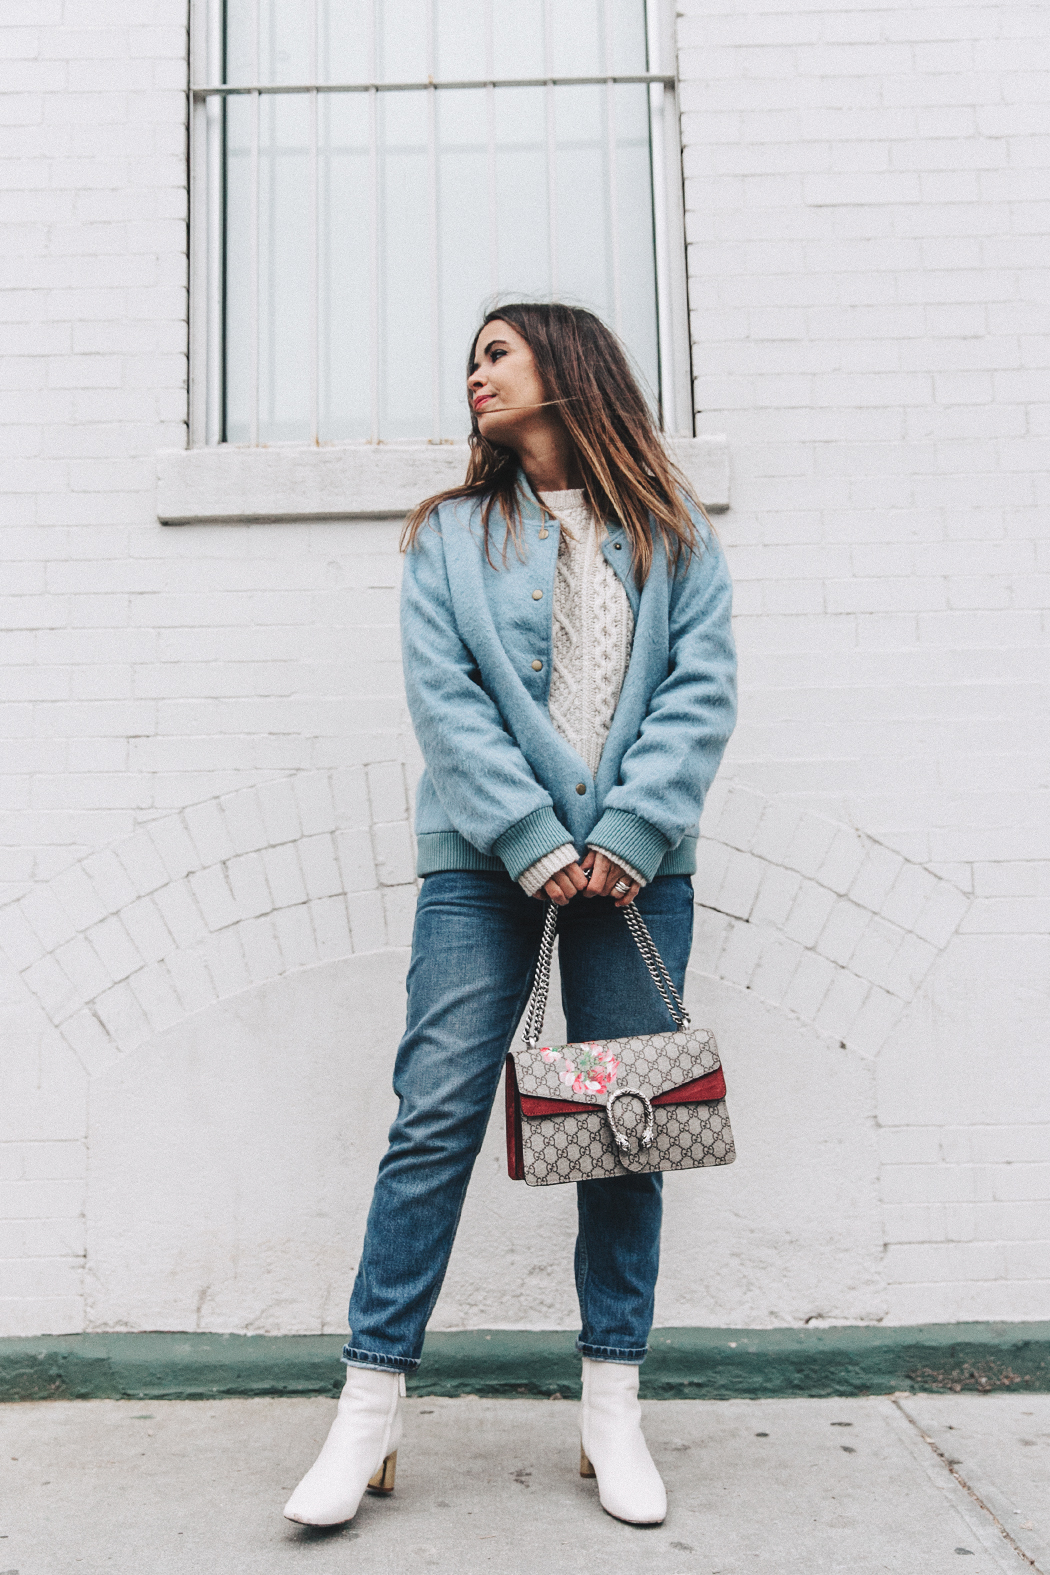 Blue_Bomber-Ganni-Topshop_Jeans-White_Boots-Gucci_Bag-Outfit-NYFW-New_York-Street_Style-17